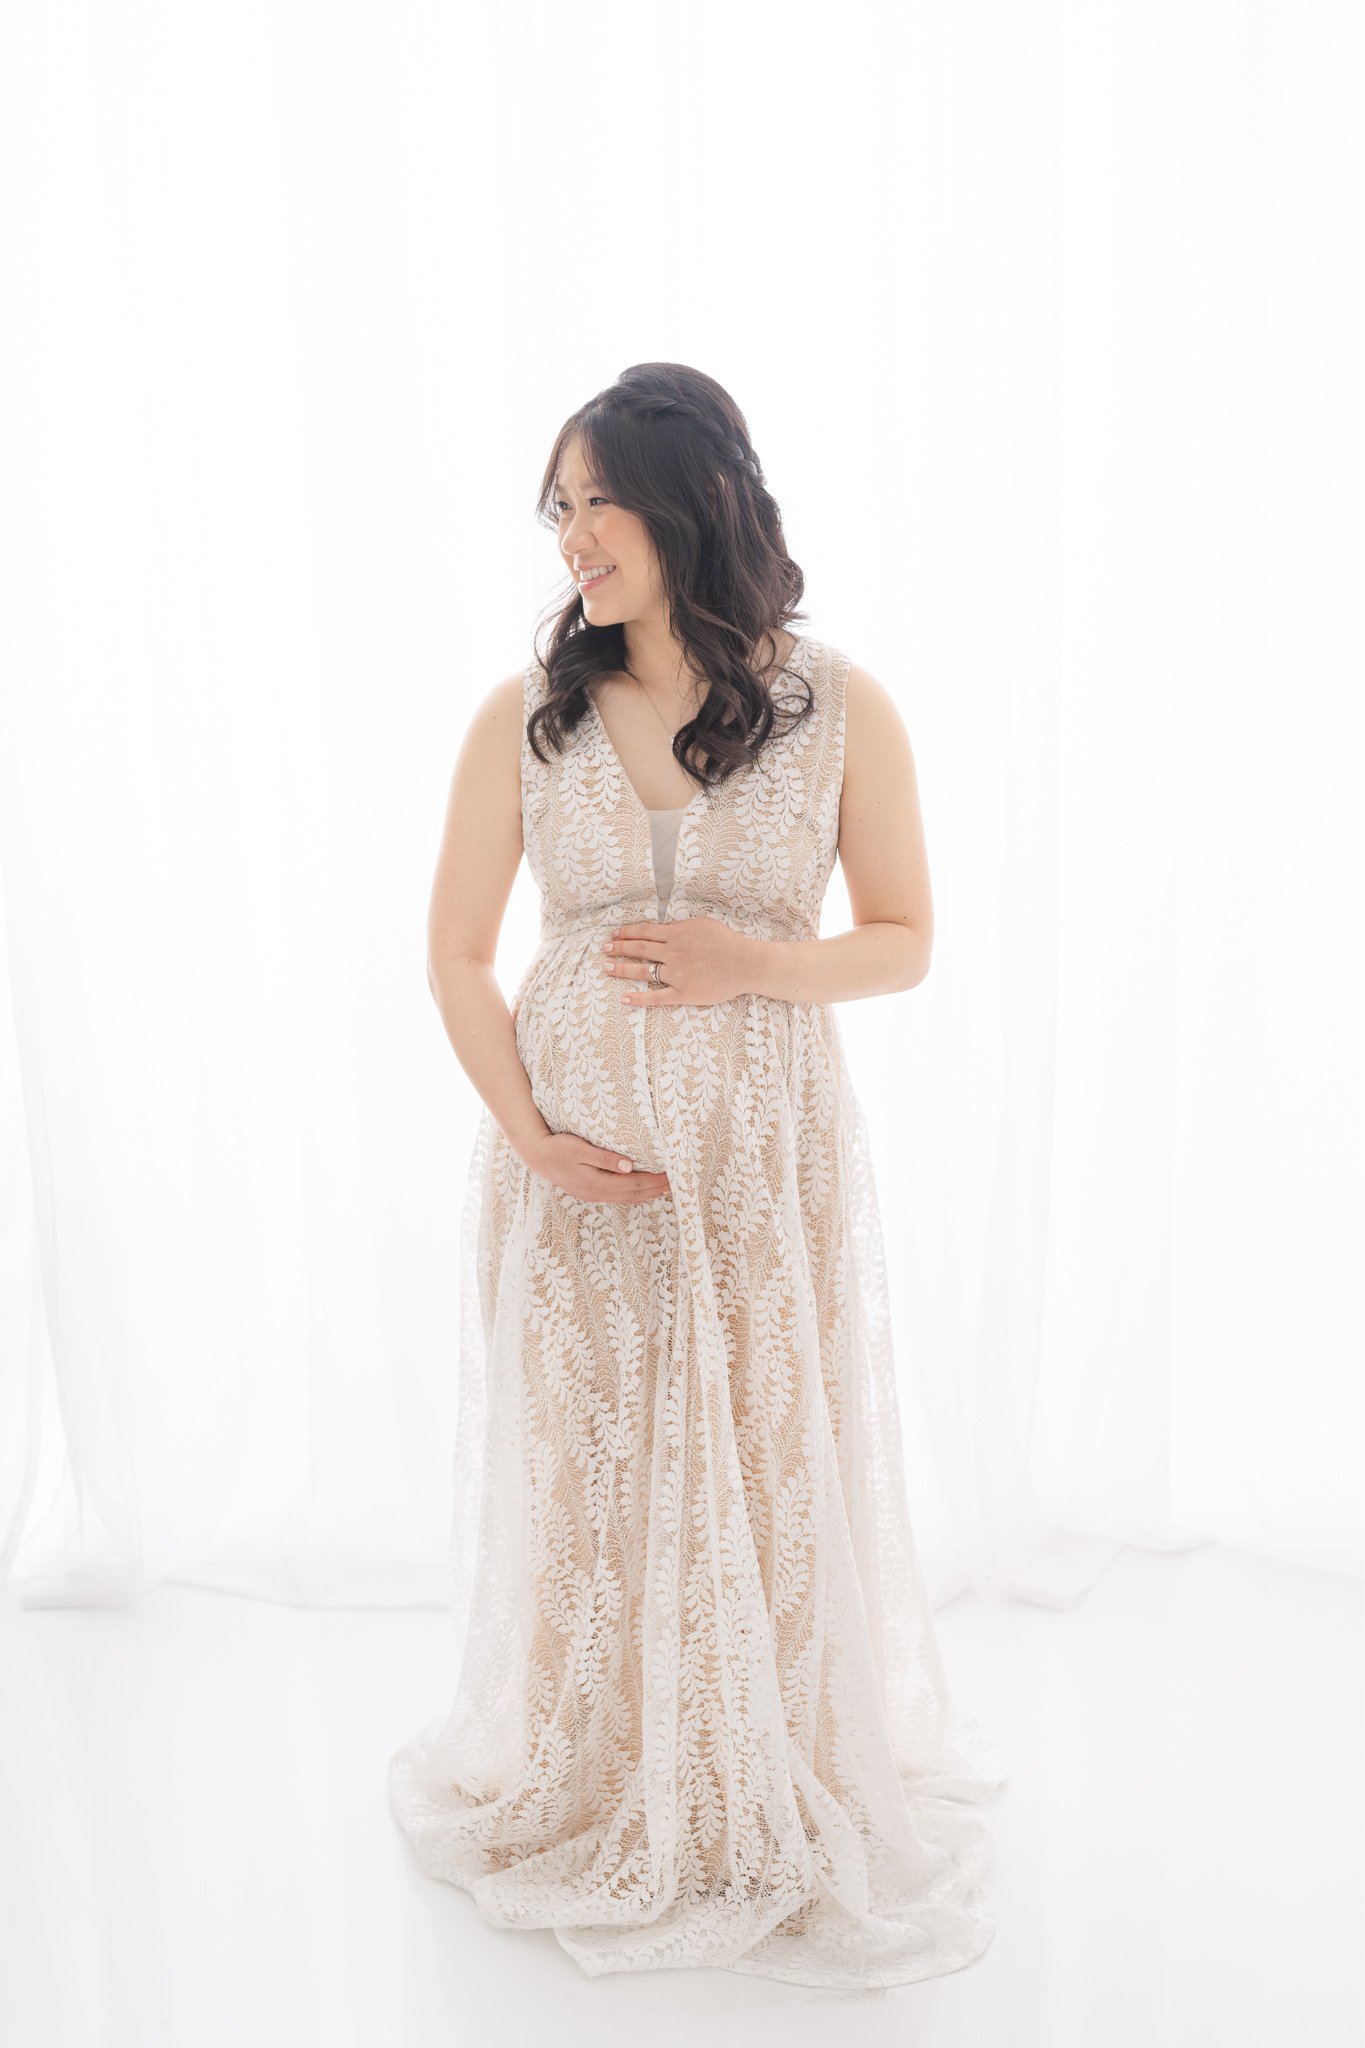  A neutral maternity gown that is flattering for any body type in a photo taken by Nicole Hawkins Photography. maternity style ideas high-end photographer #NicoleHawkinsPhotography #NicoleHawkinsMaternity #MaternityPhotography #Maternitystyle #NJMate